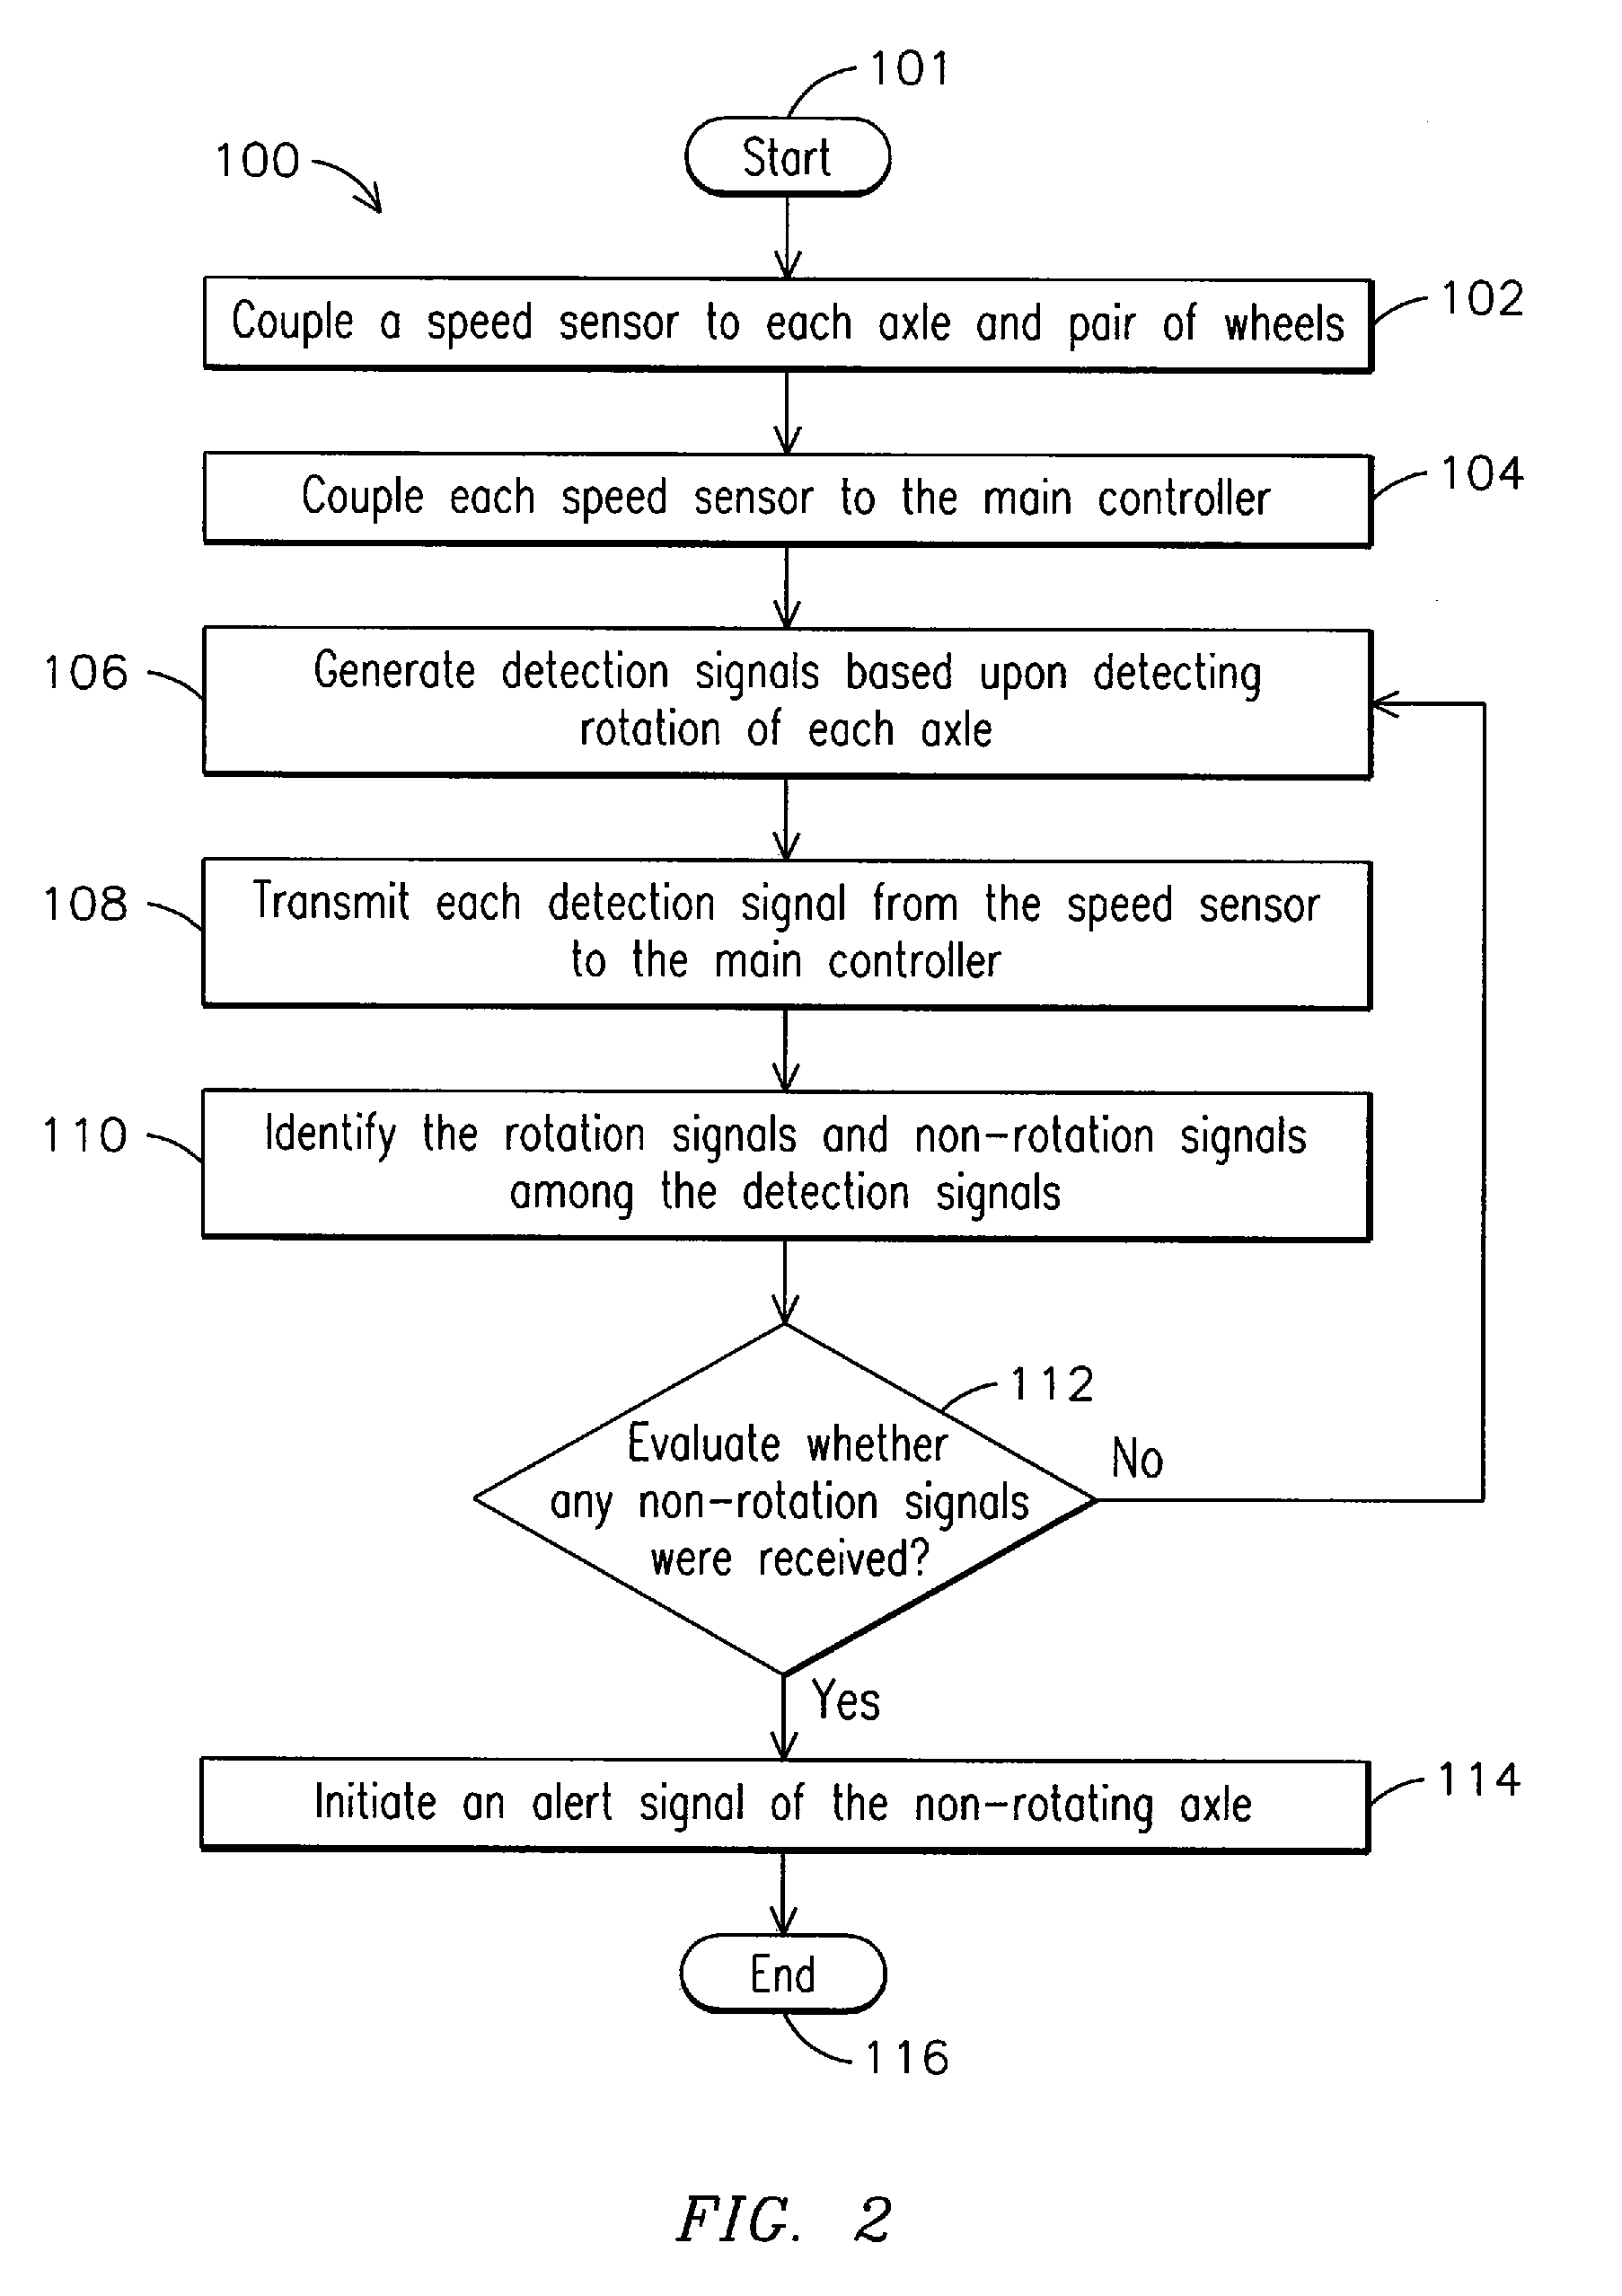 System, Method and Computer Readable Media for Reducing Wheel Sliding on a Locomotive